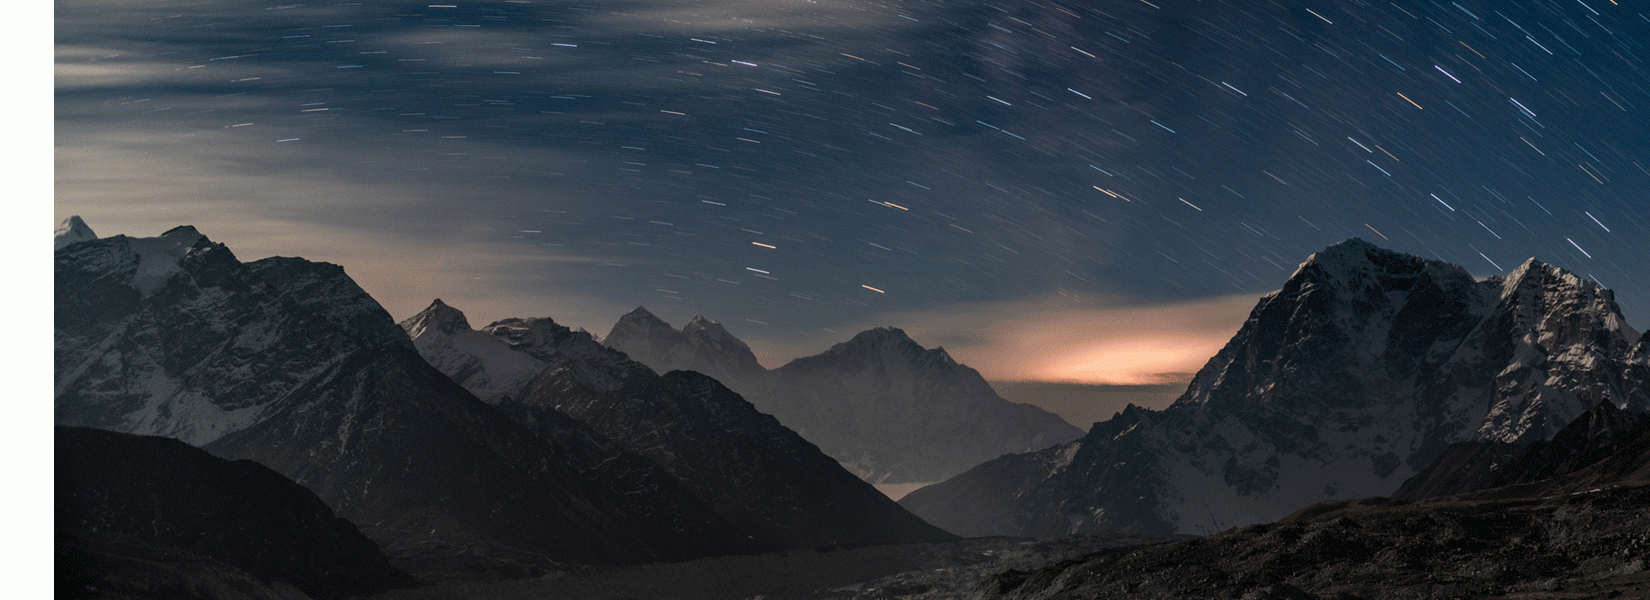 MID NIGHT SHOT FROM EVEREST 